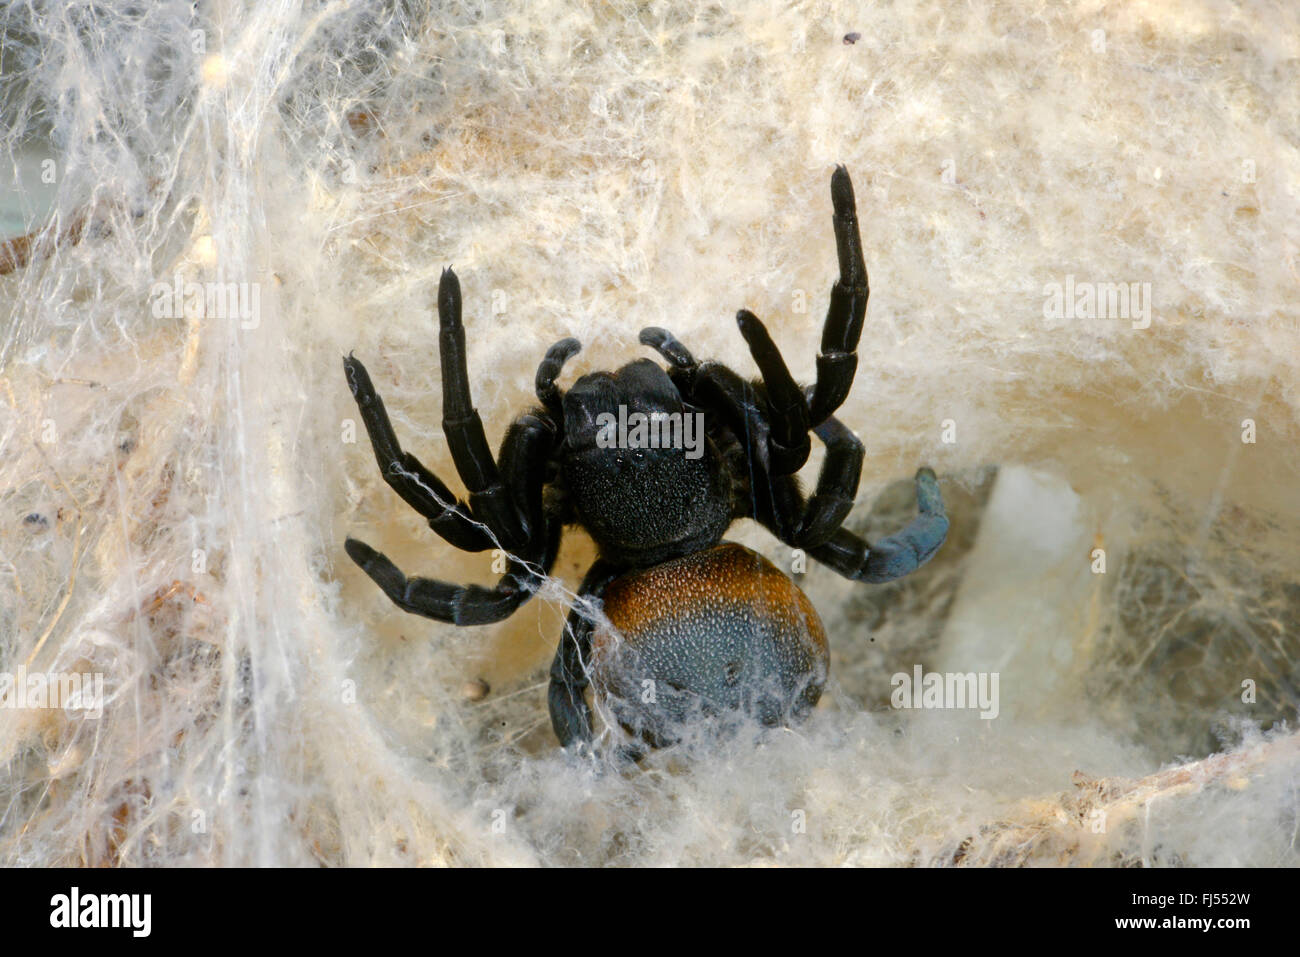 Eresid spider, Ladybird spider (Eresus walckenaeri), female in the entrance of the cave, Greece Stock Photo